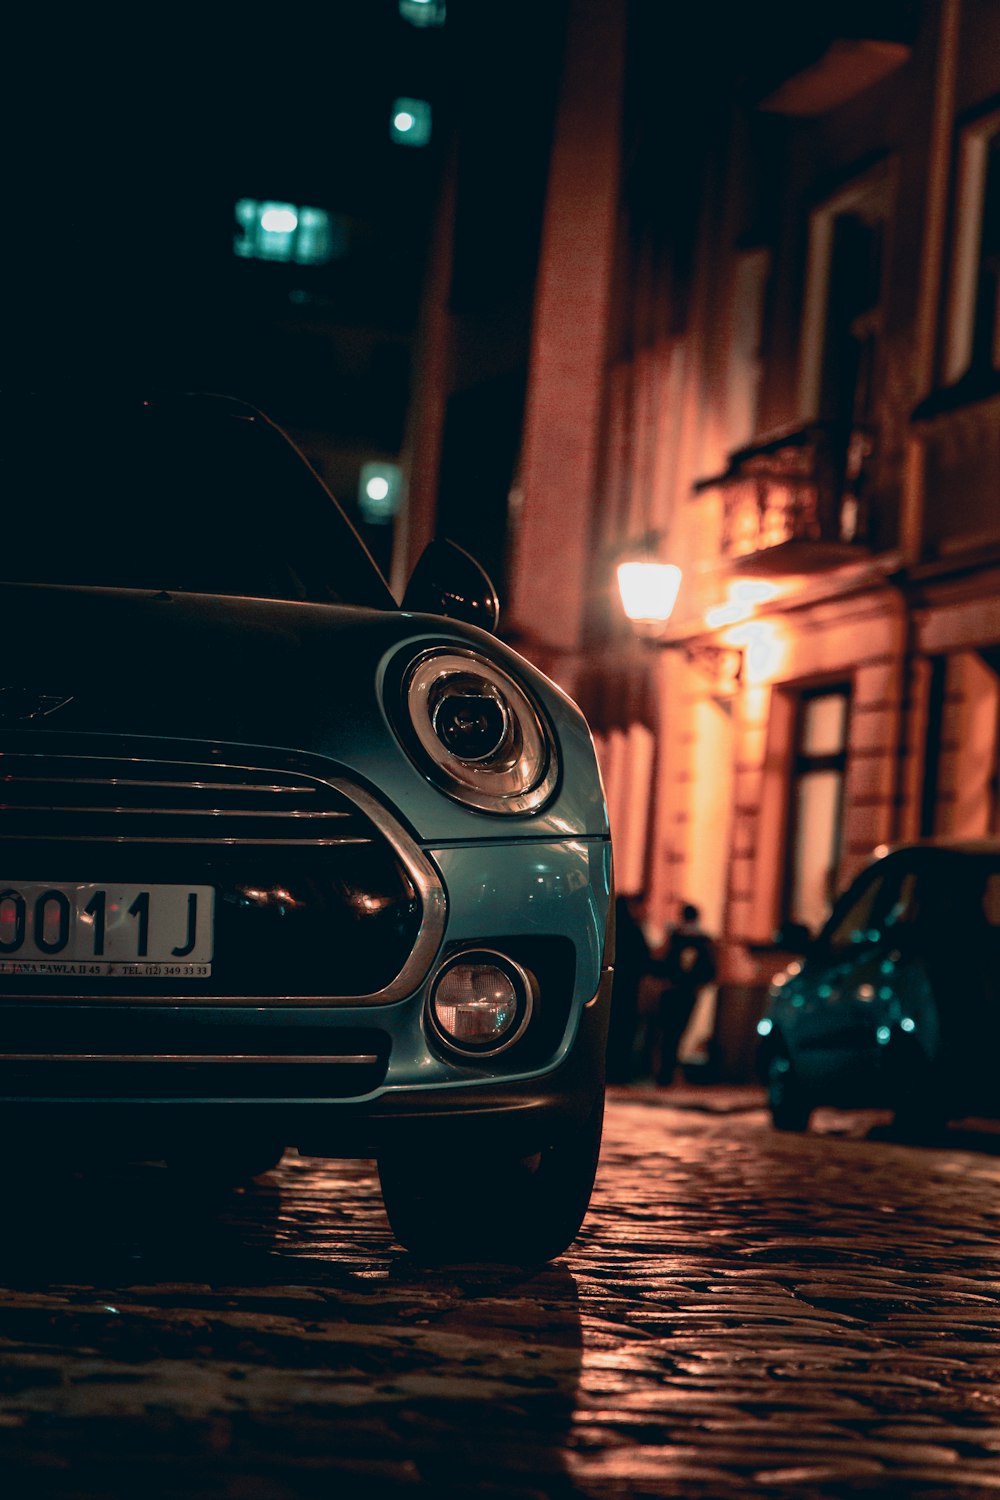 a small car parked on a cobblestone street at night